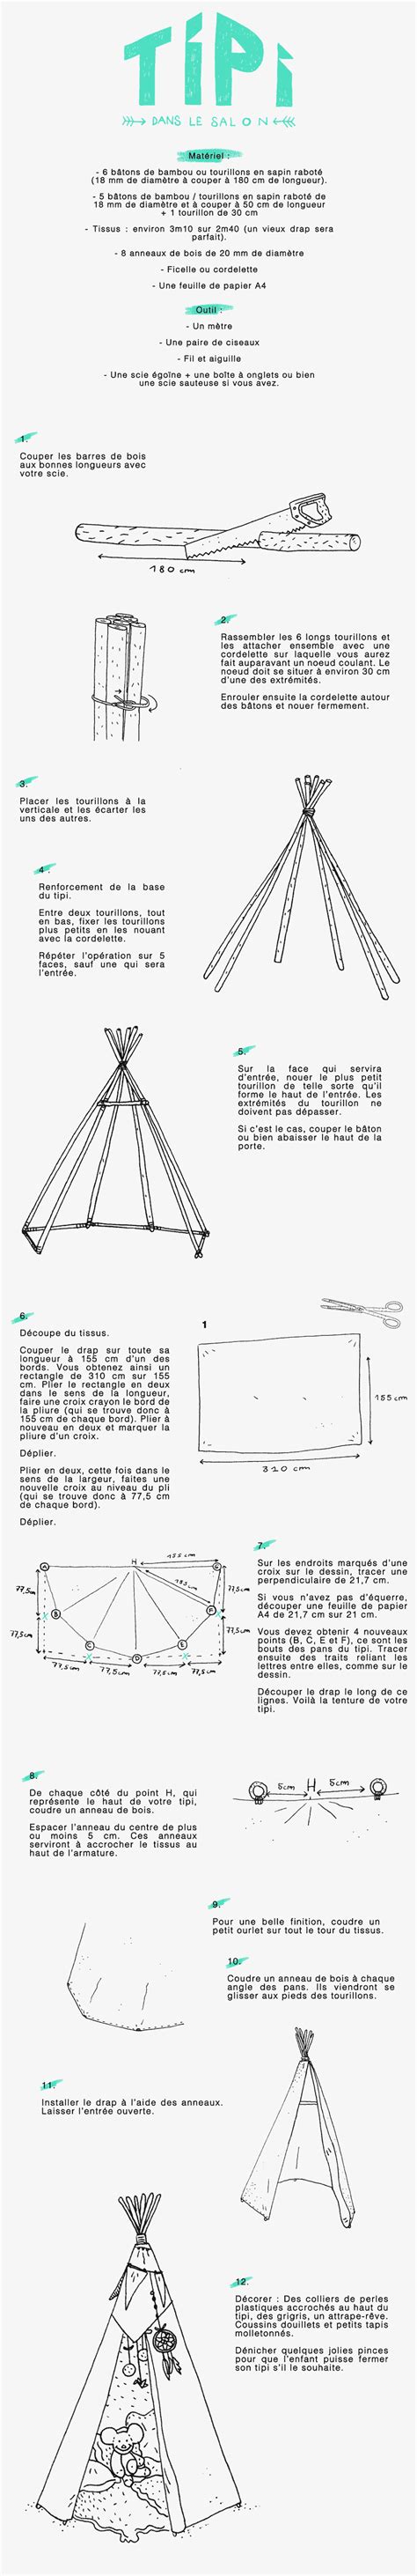 some diagrams showing how to use the top and bottom parts of a tent for camping